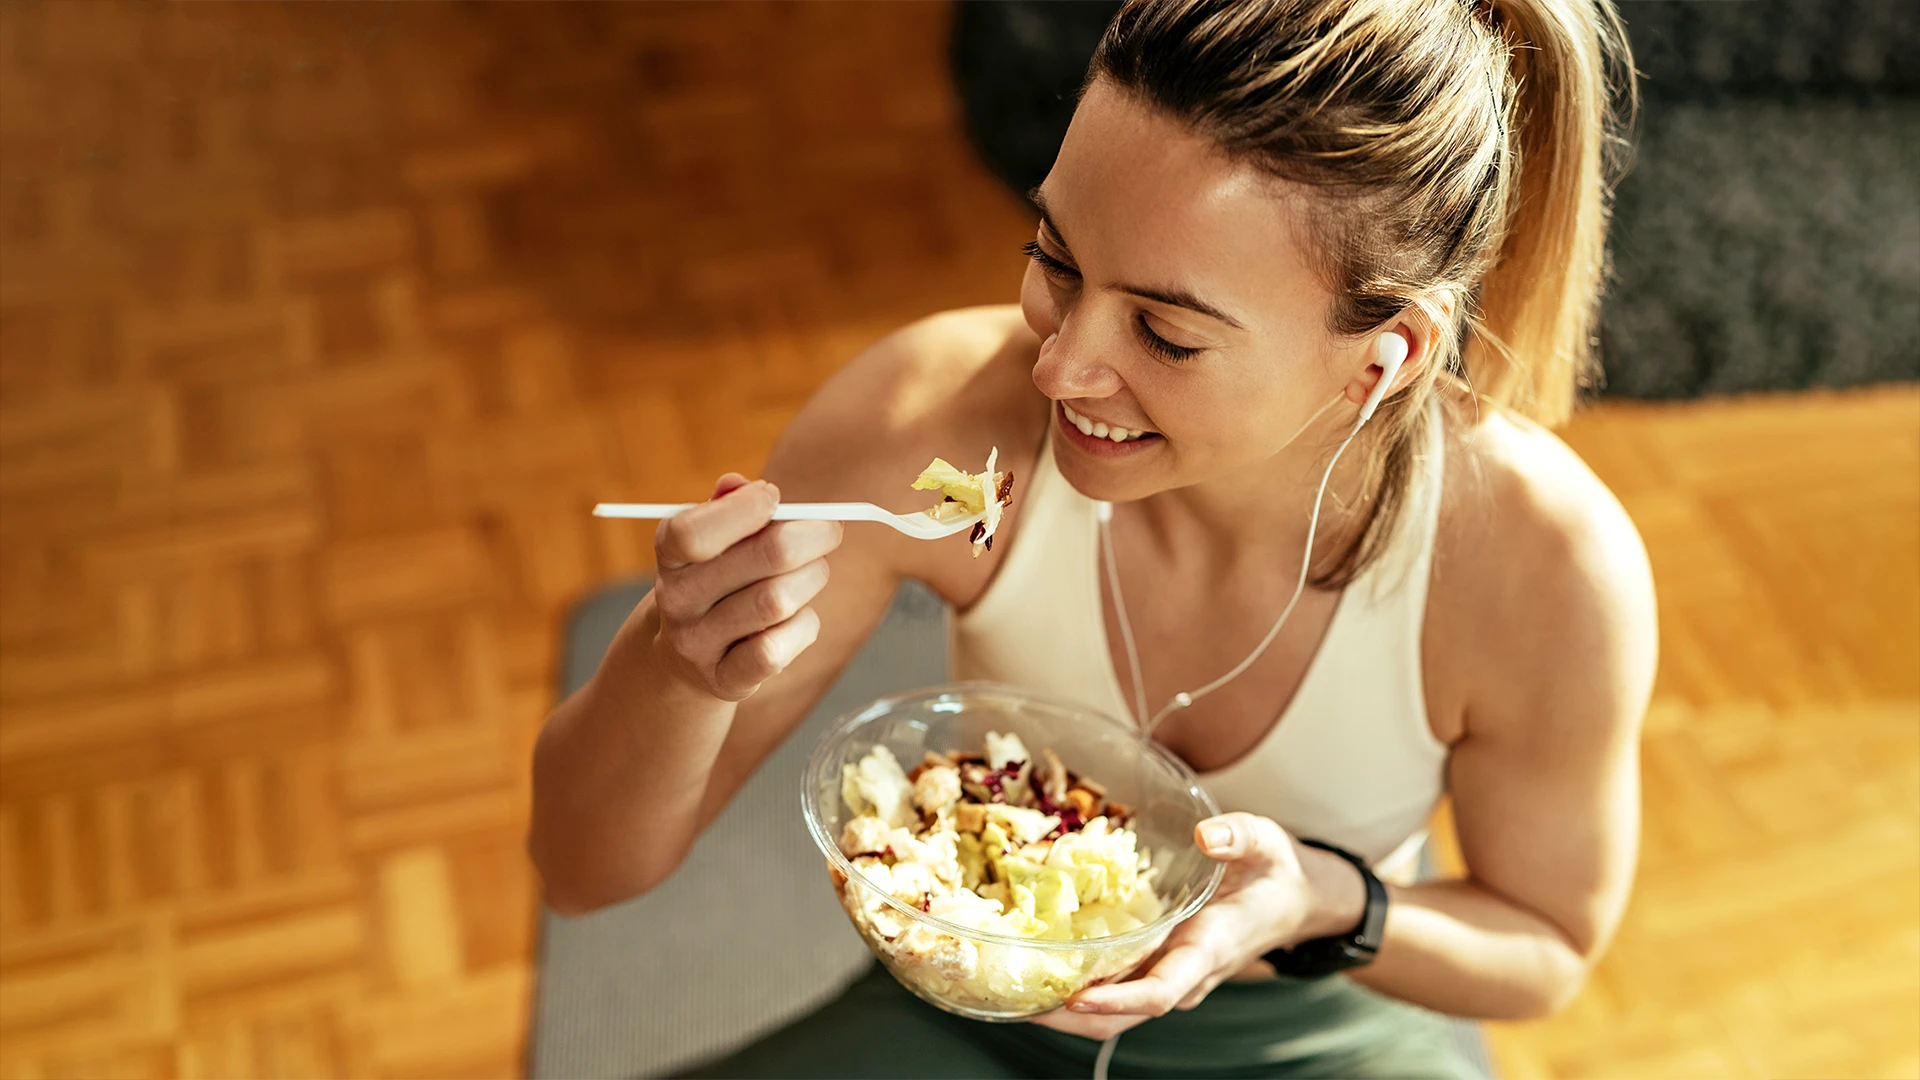 Woman eating a healthy lunch